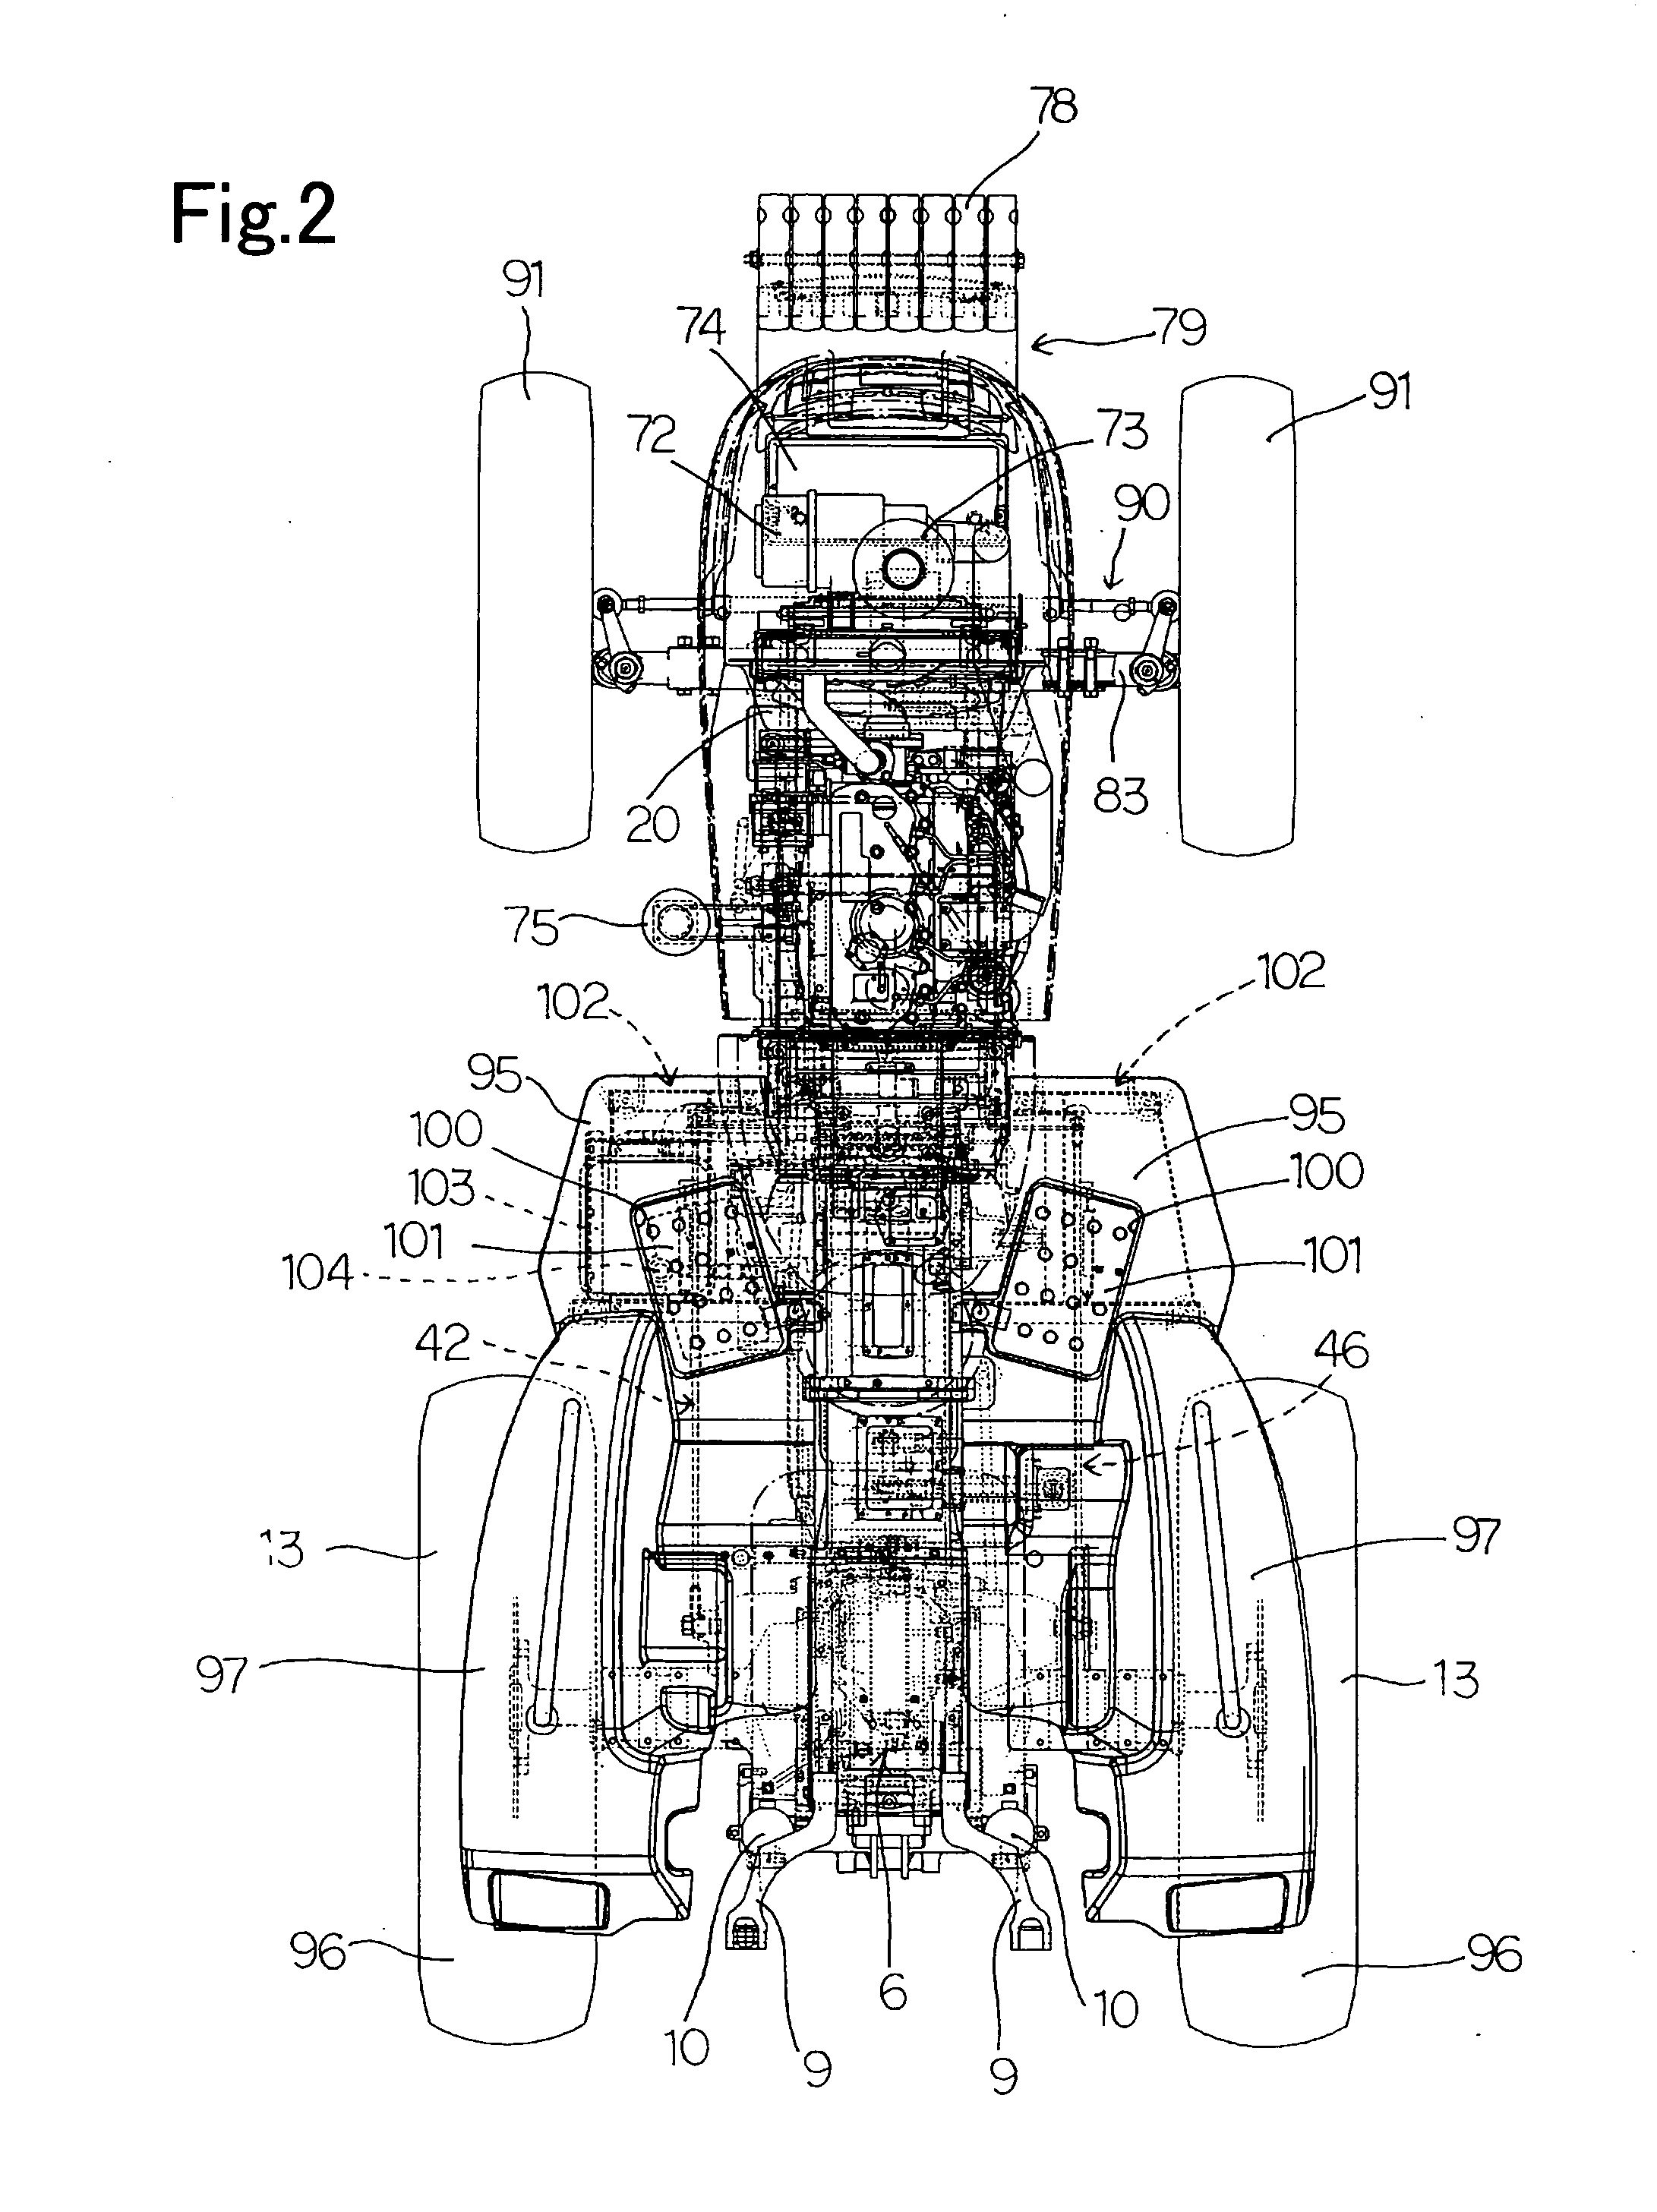 Assembling Method of Tractor and Tractor